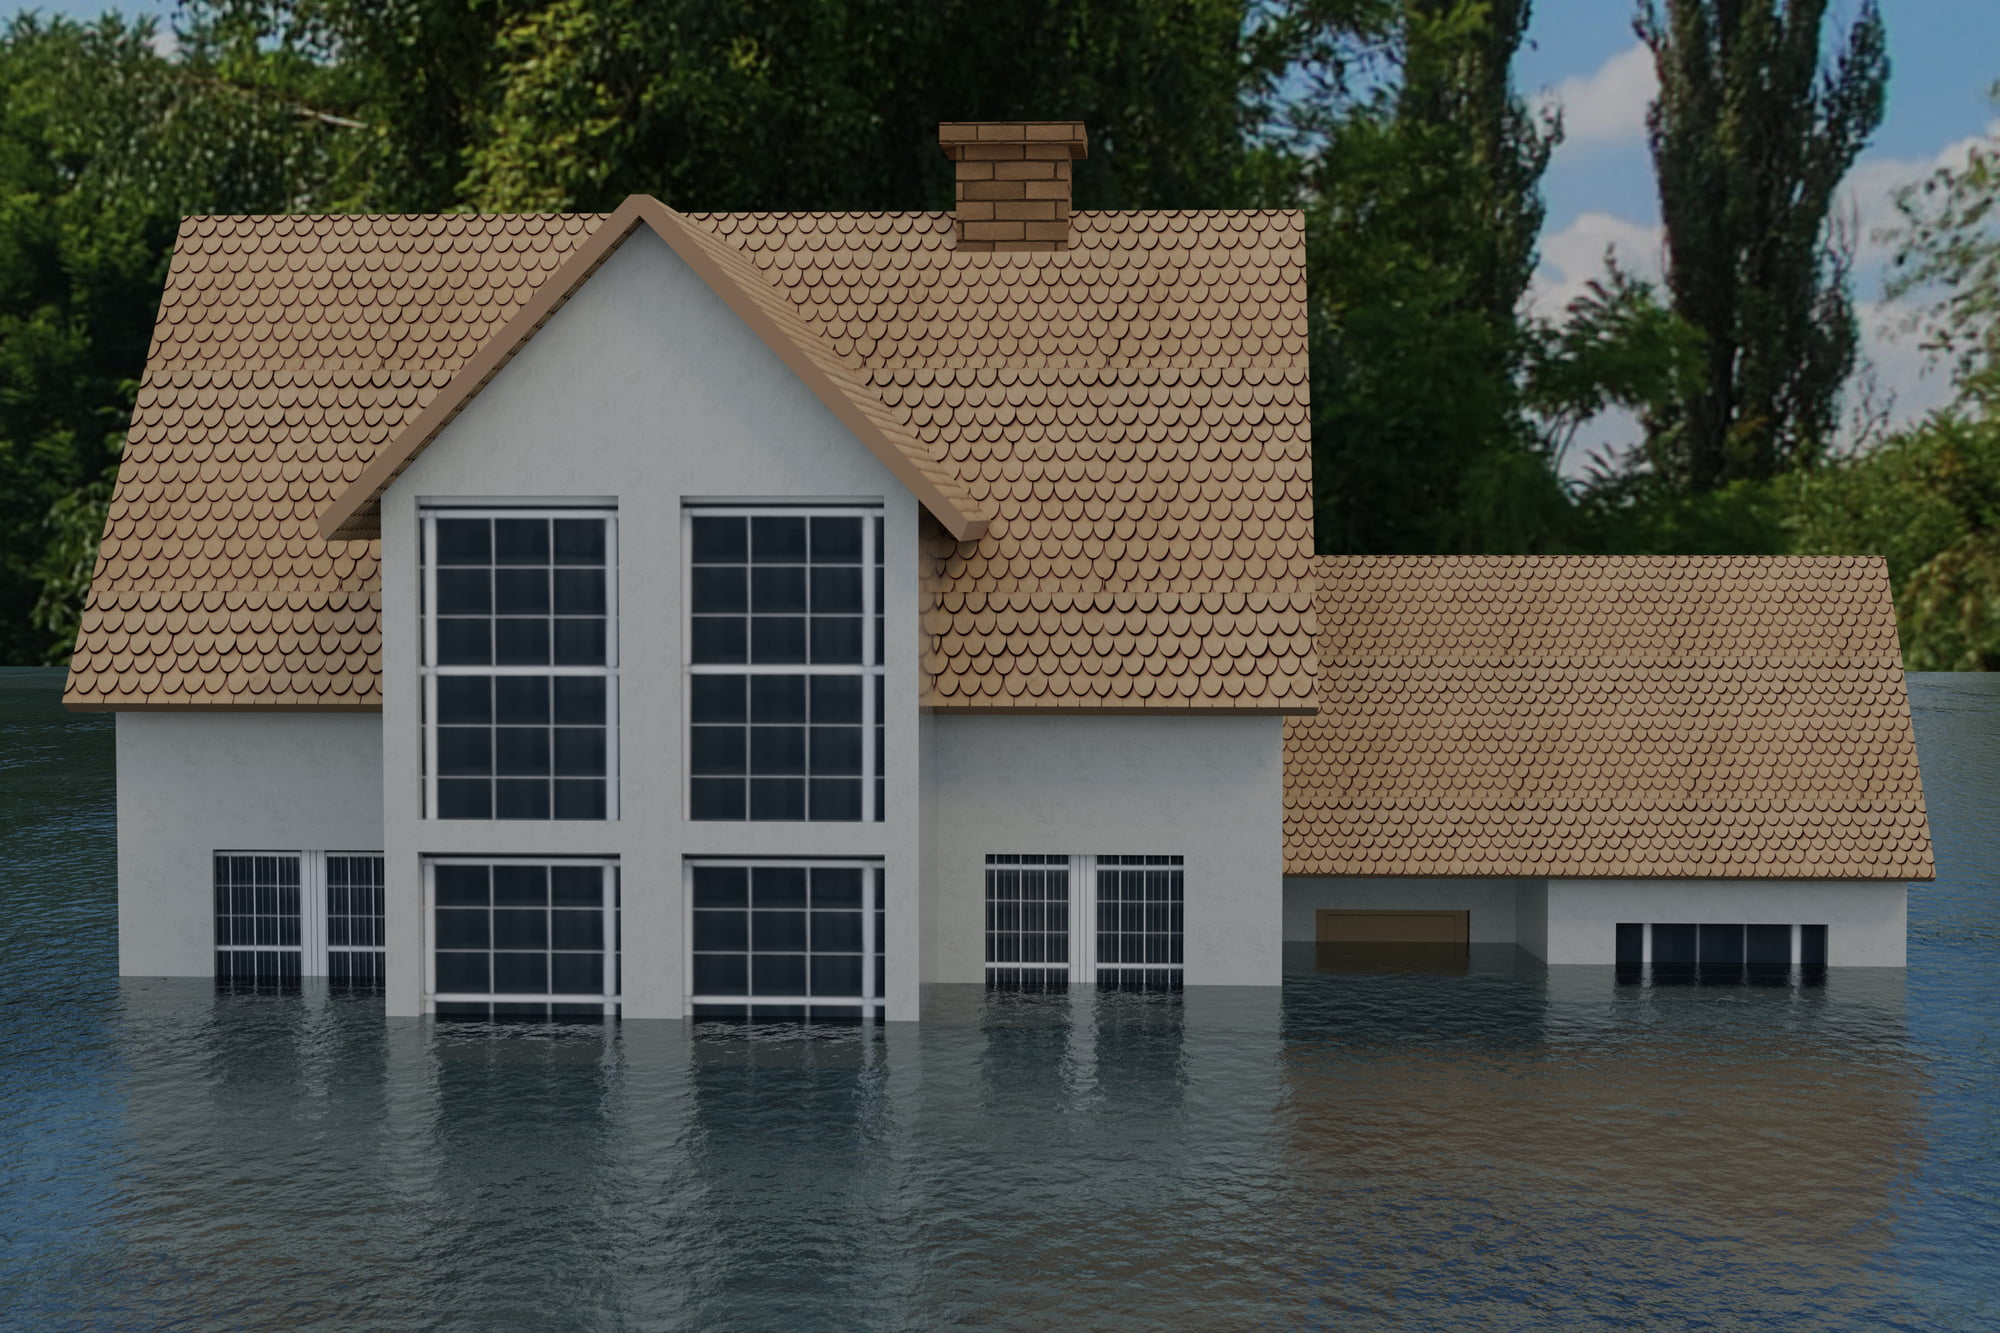 A flooded basement can send any homeowner into despair. We're here to help with these 5 tips on what to do when your basement floods.